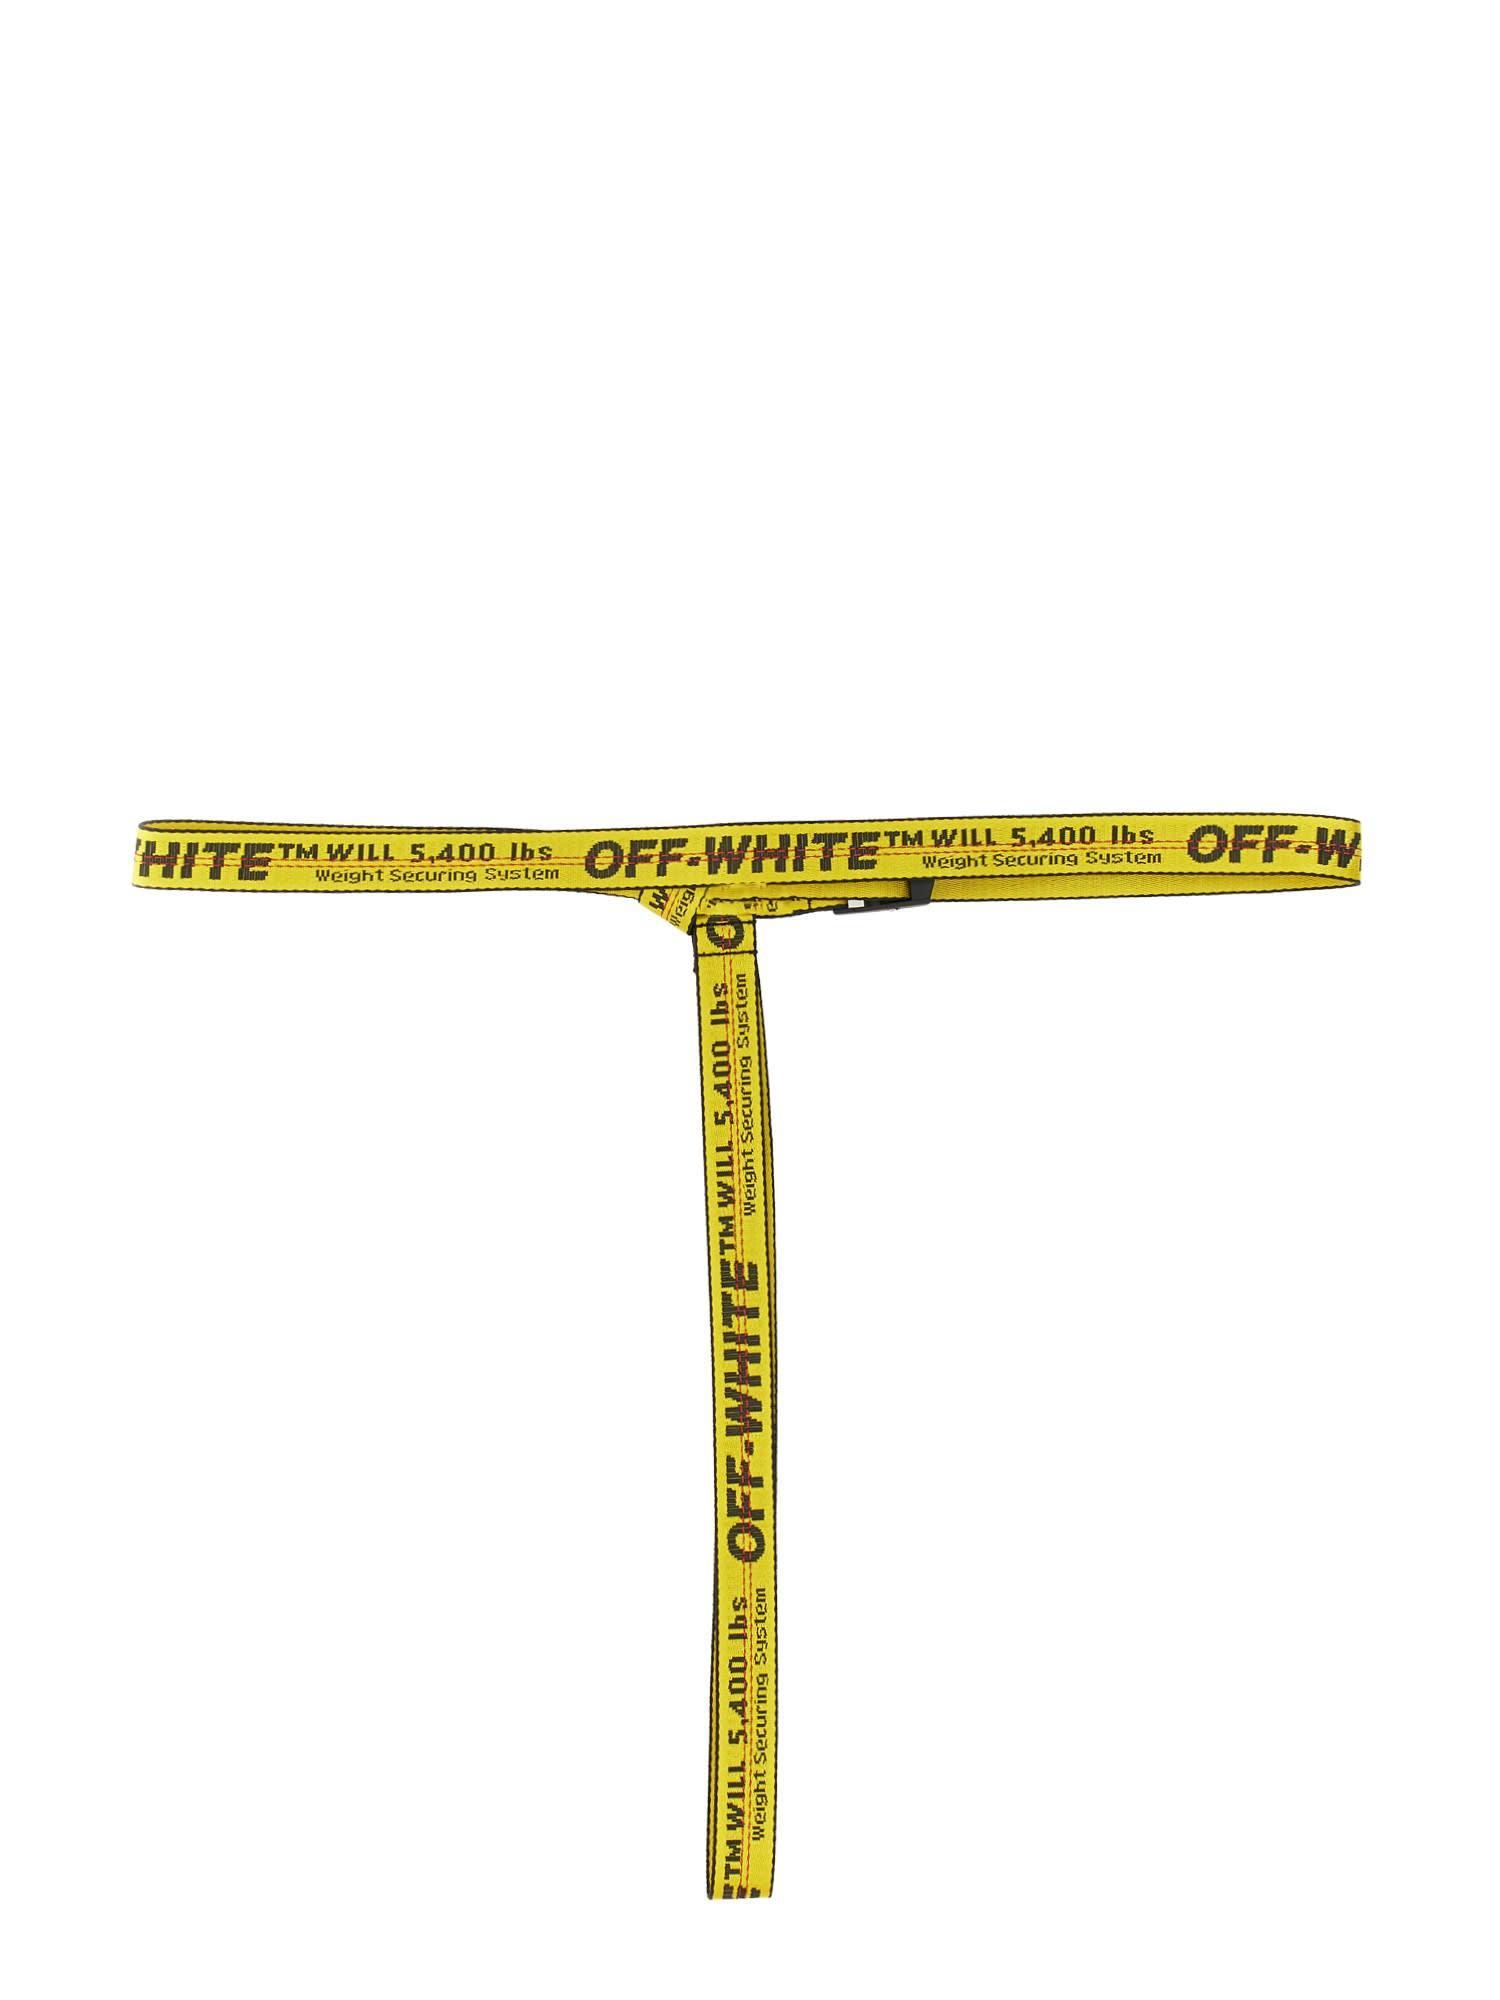 Off-White Yellow c/o Virgil Abloh 2019 Mini Industrial Belt One Size